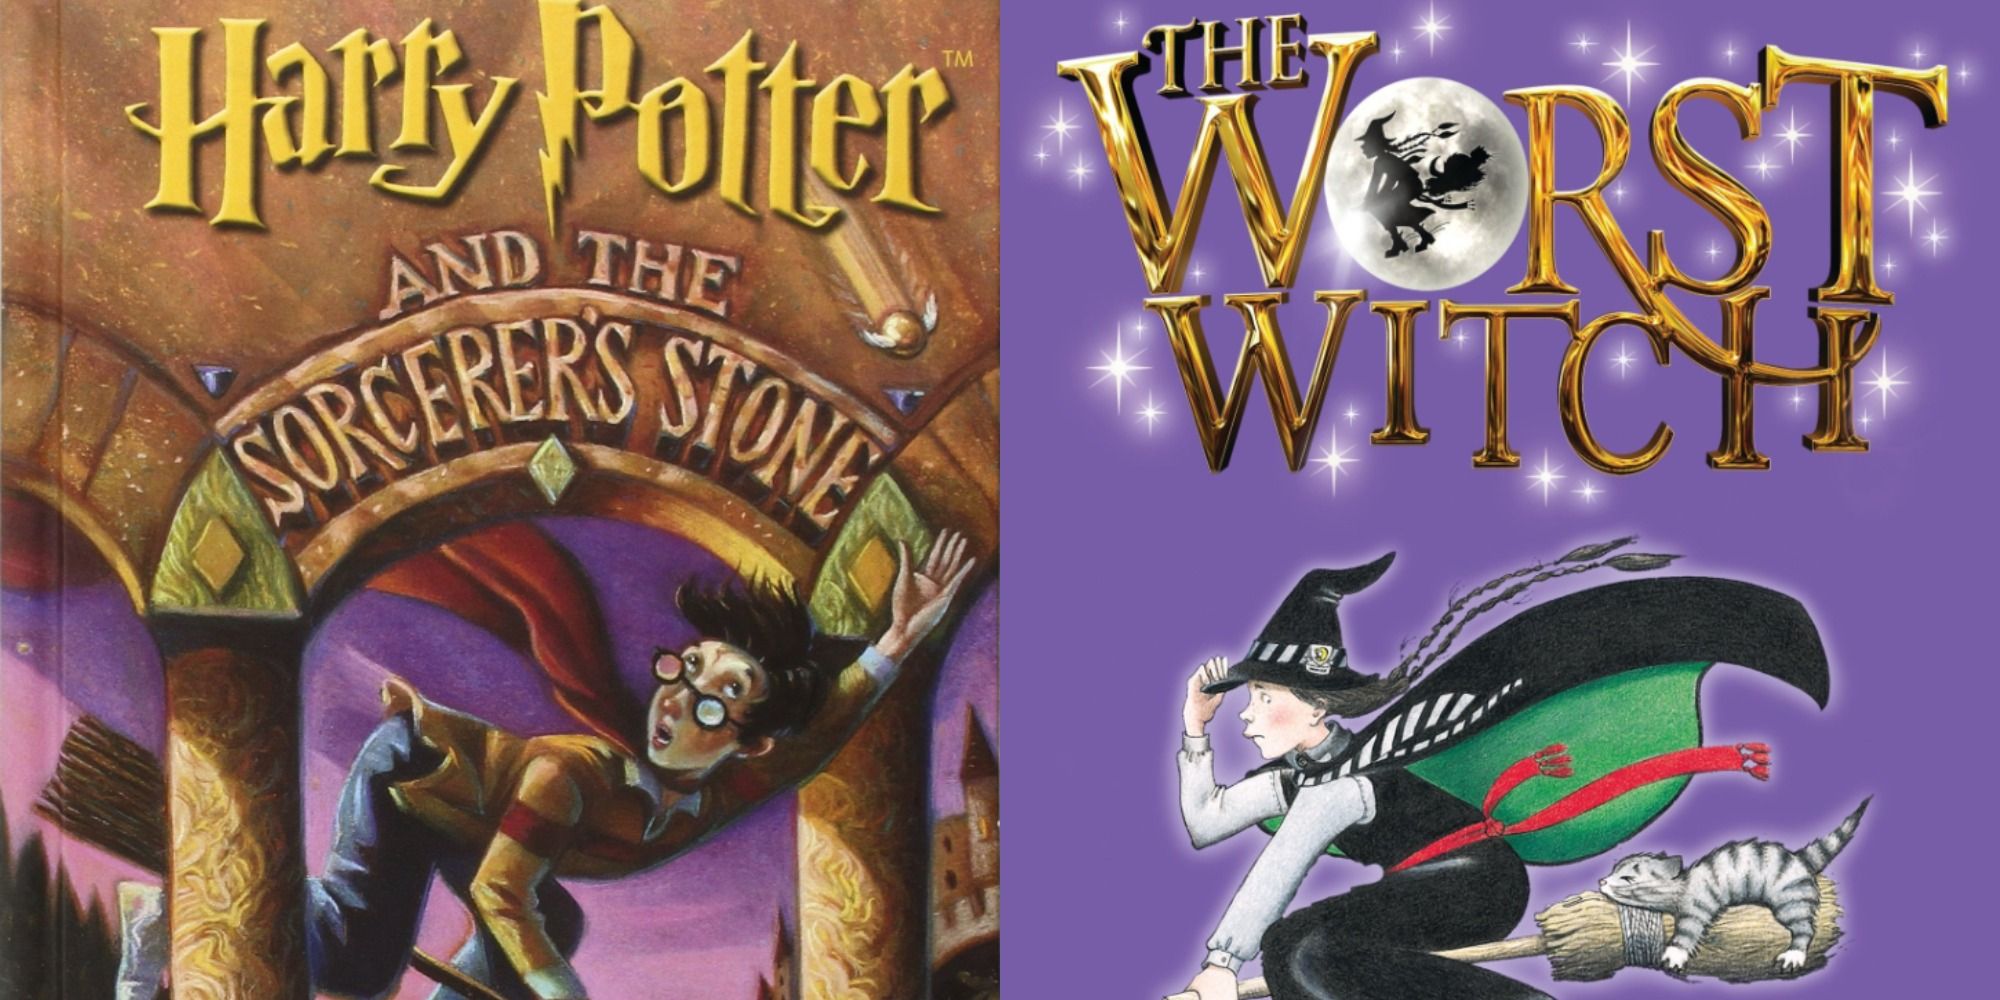 Split image showing covers for Harry Potter and the Sorcerer's Stone and The Worst Witch